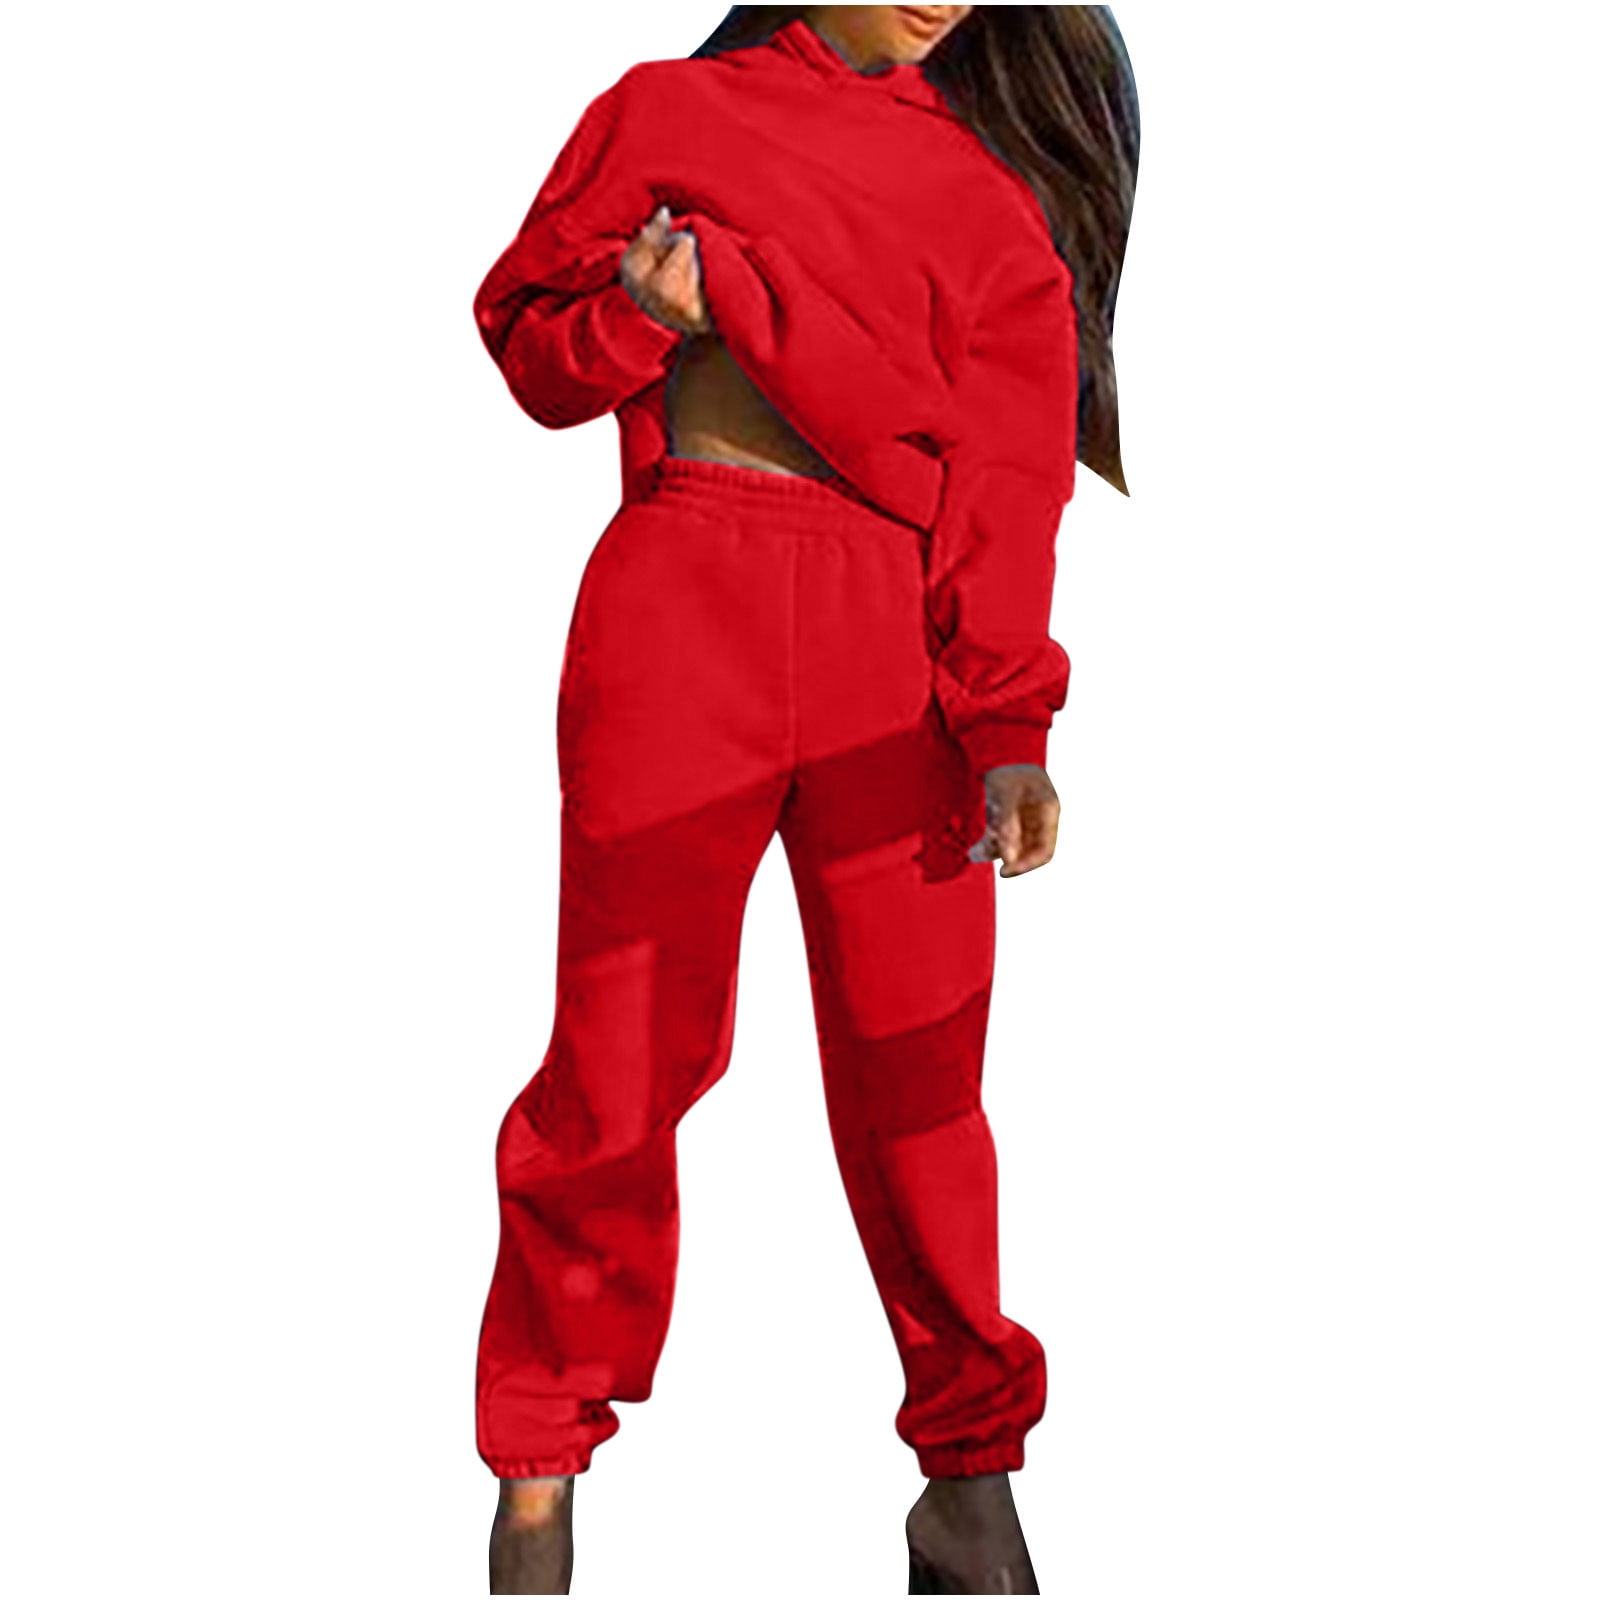 Women's Two Sweat Suits